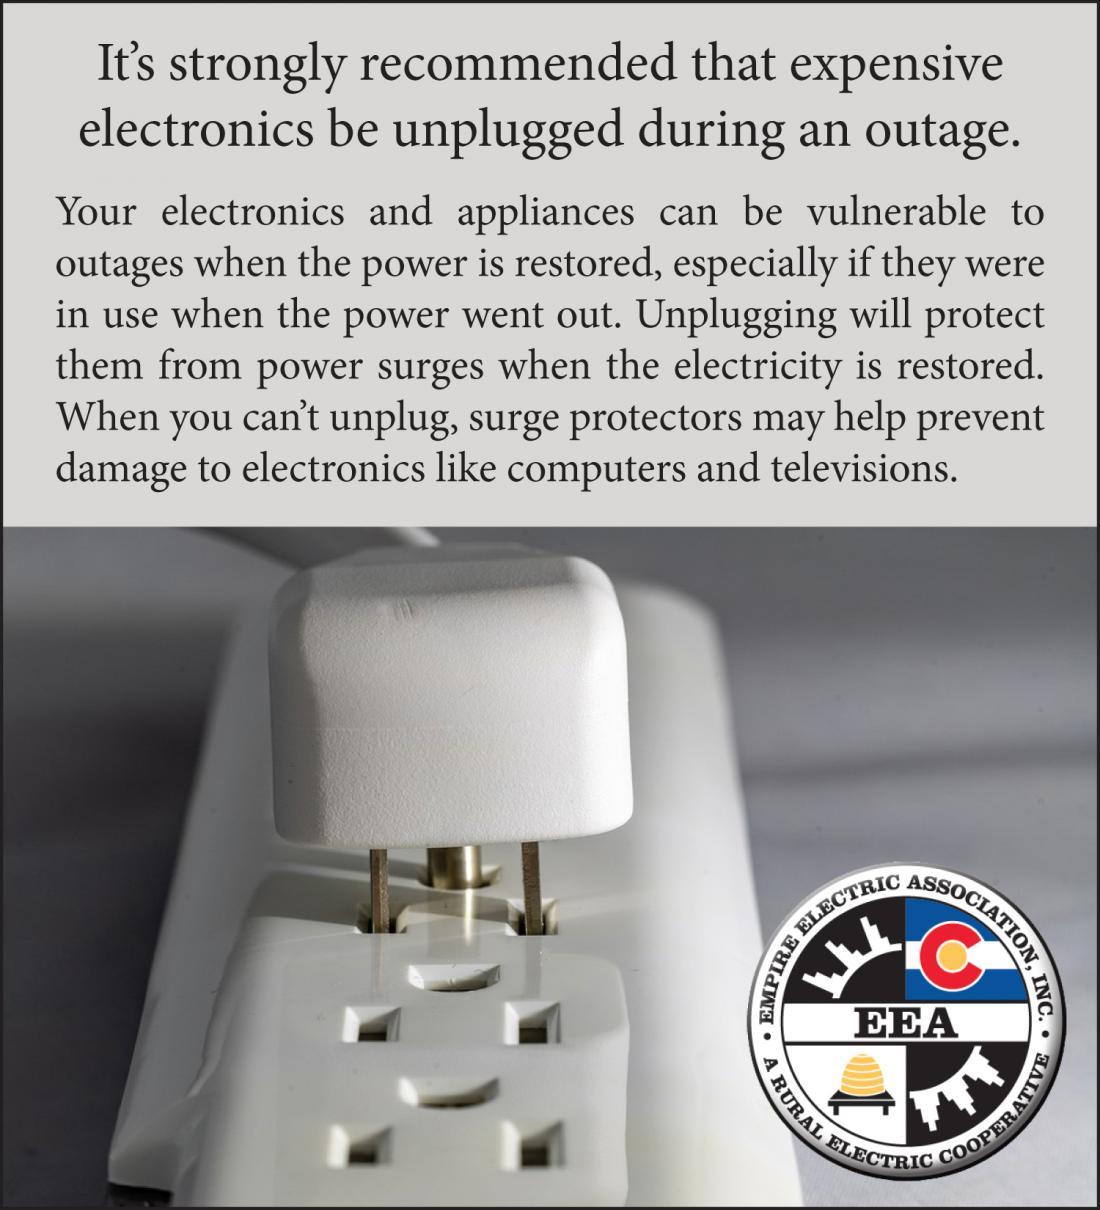 Unplug Appliances During Outage_0.jpg